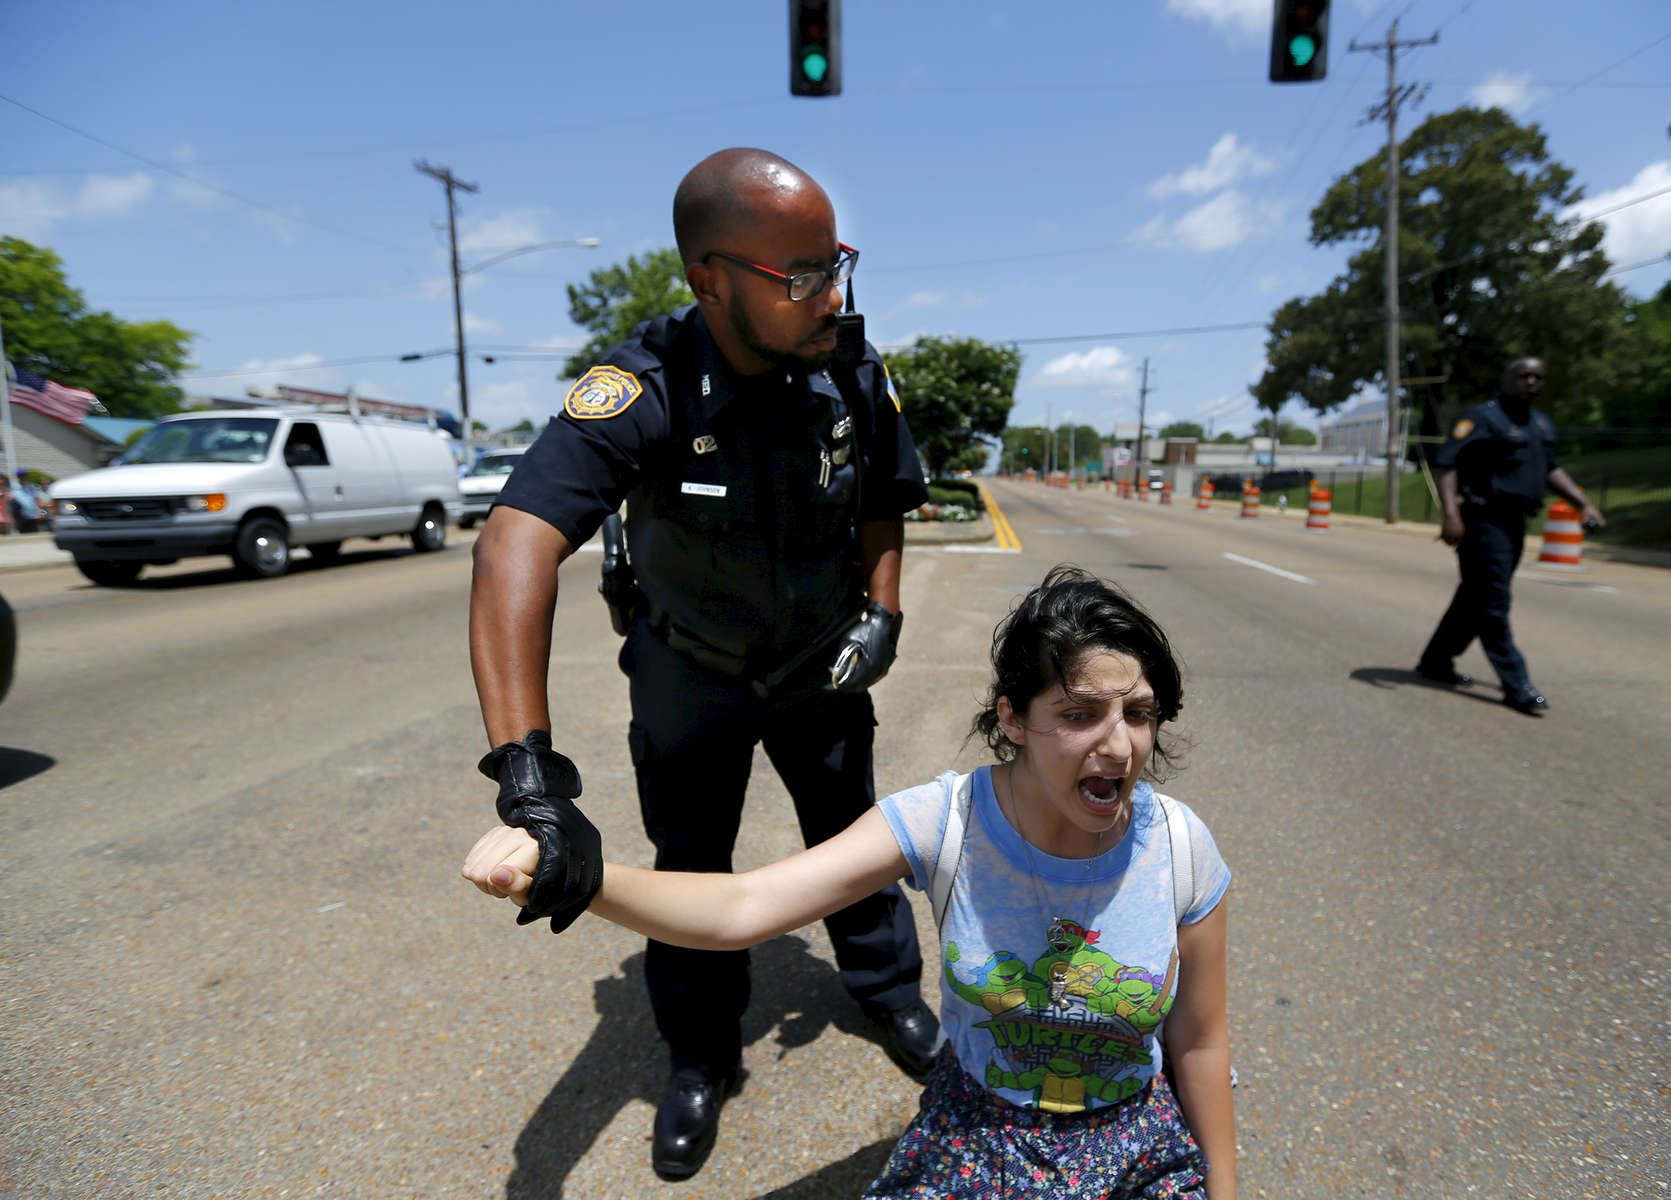 July 12, 2016 - Tamam Quran is handcuffed and detained by police during a Black Lives Matter rally outside Graceland on Elvis Presley Blvd Tuesday afternoon. Roughly 60-70 people gathered peacefully outside the gates of the famous tourist destination. (Mike Brown/The Commercial Appeal)